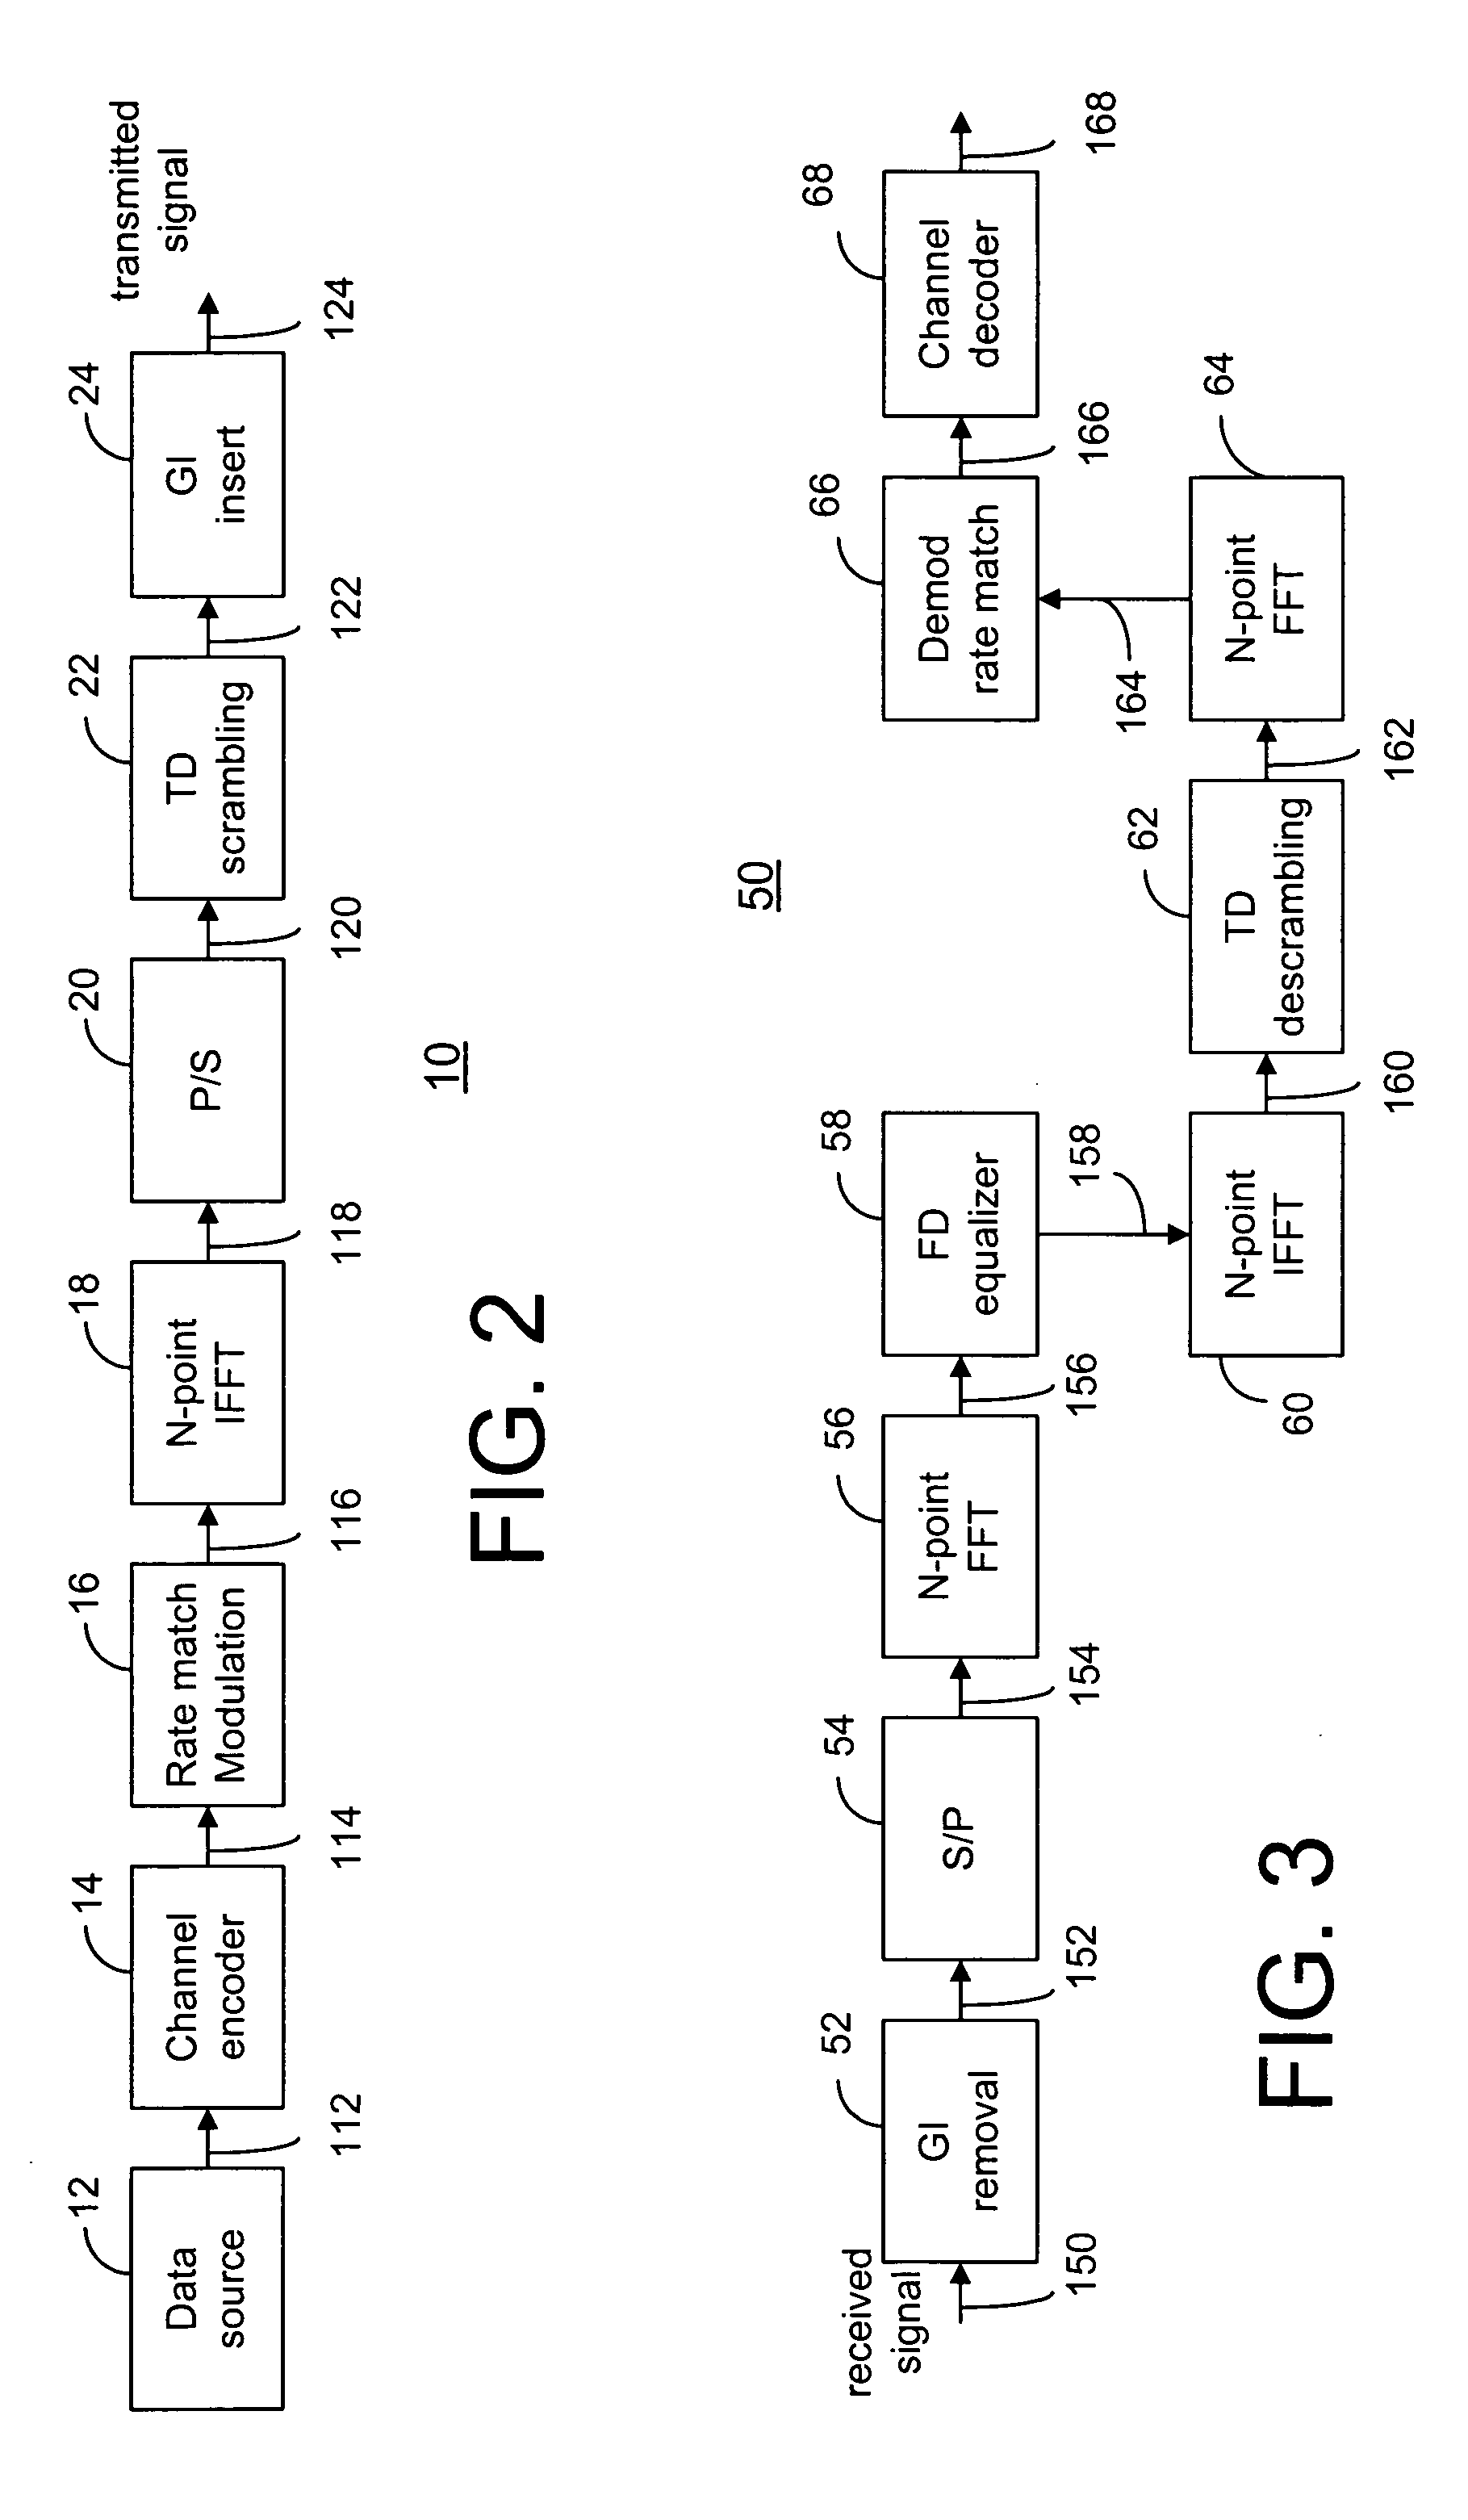 OFDM transceiver structure with time-domain scrambling